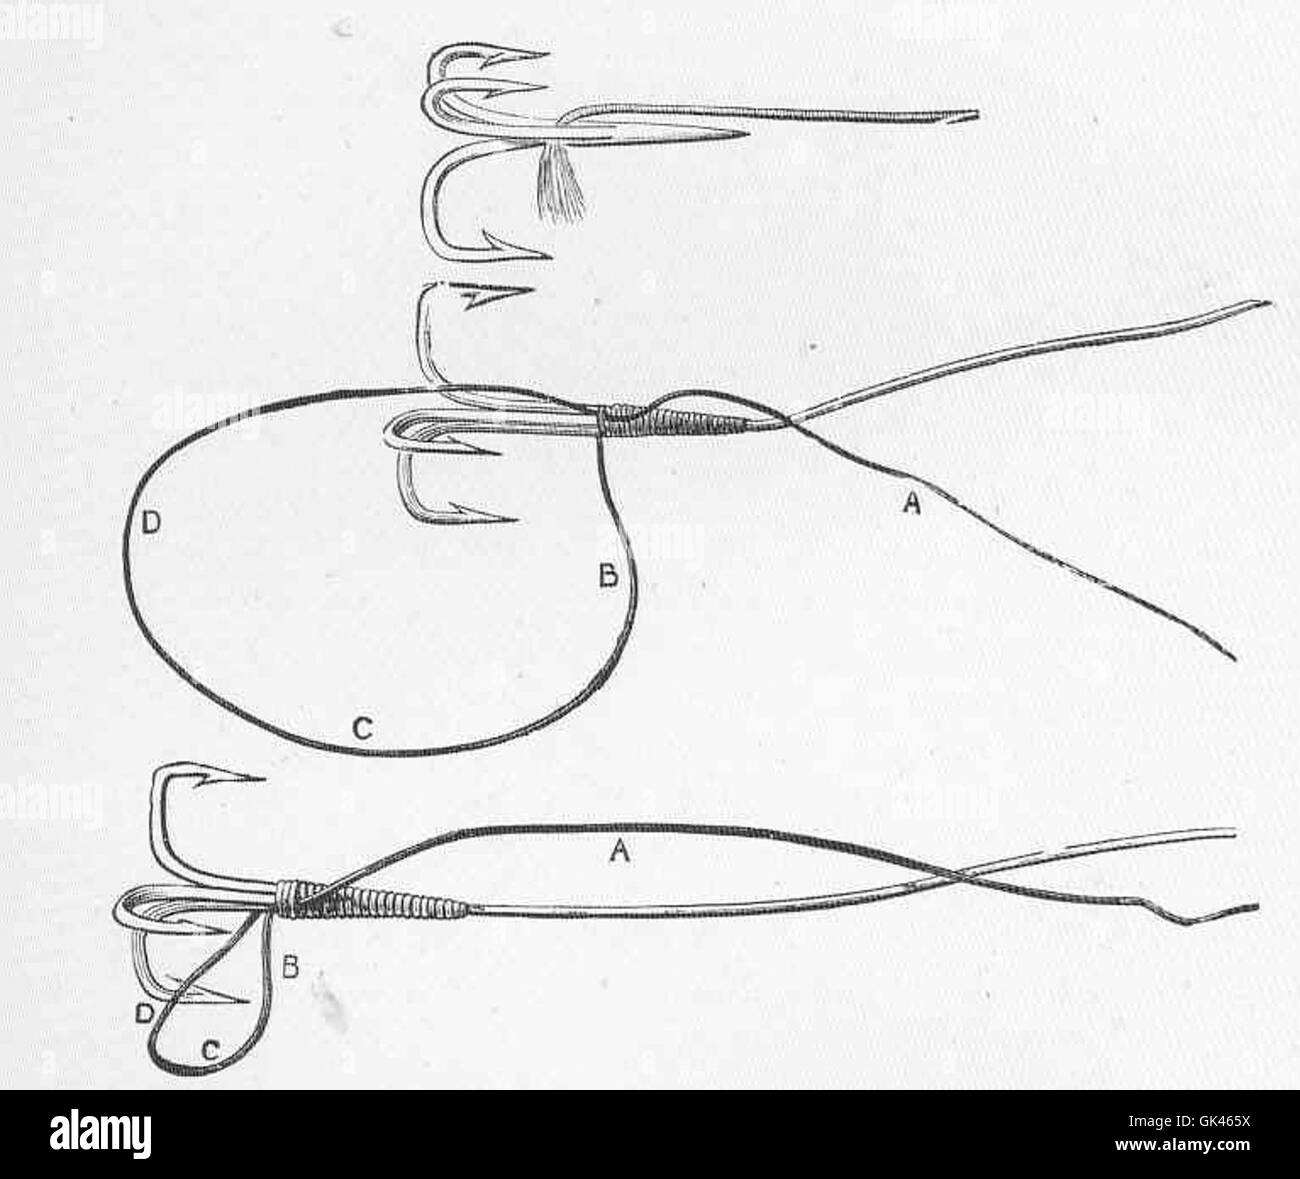 A treble hook Black and White Stock Photos & Images - Alamy